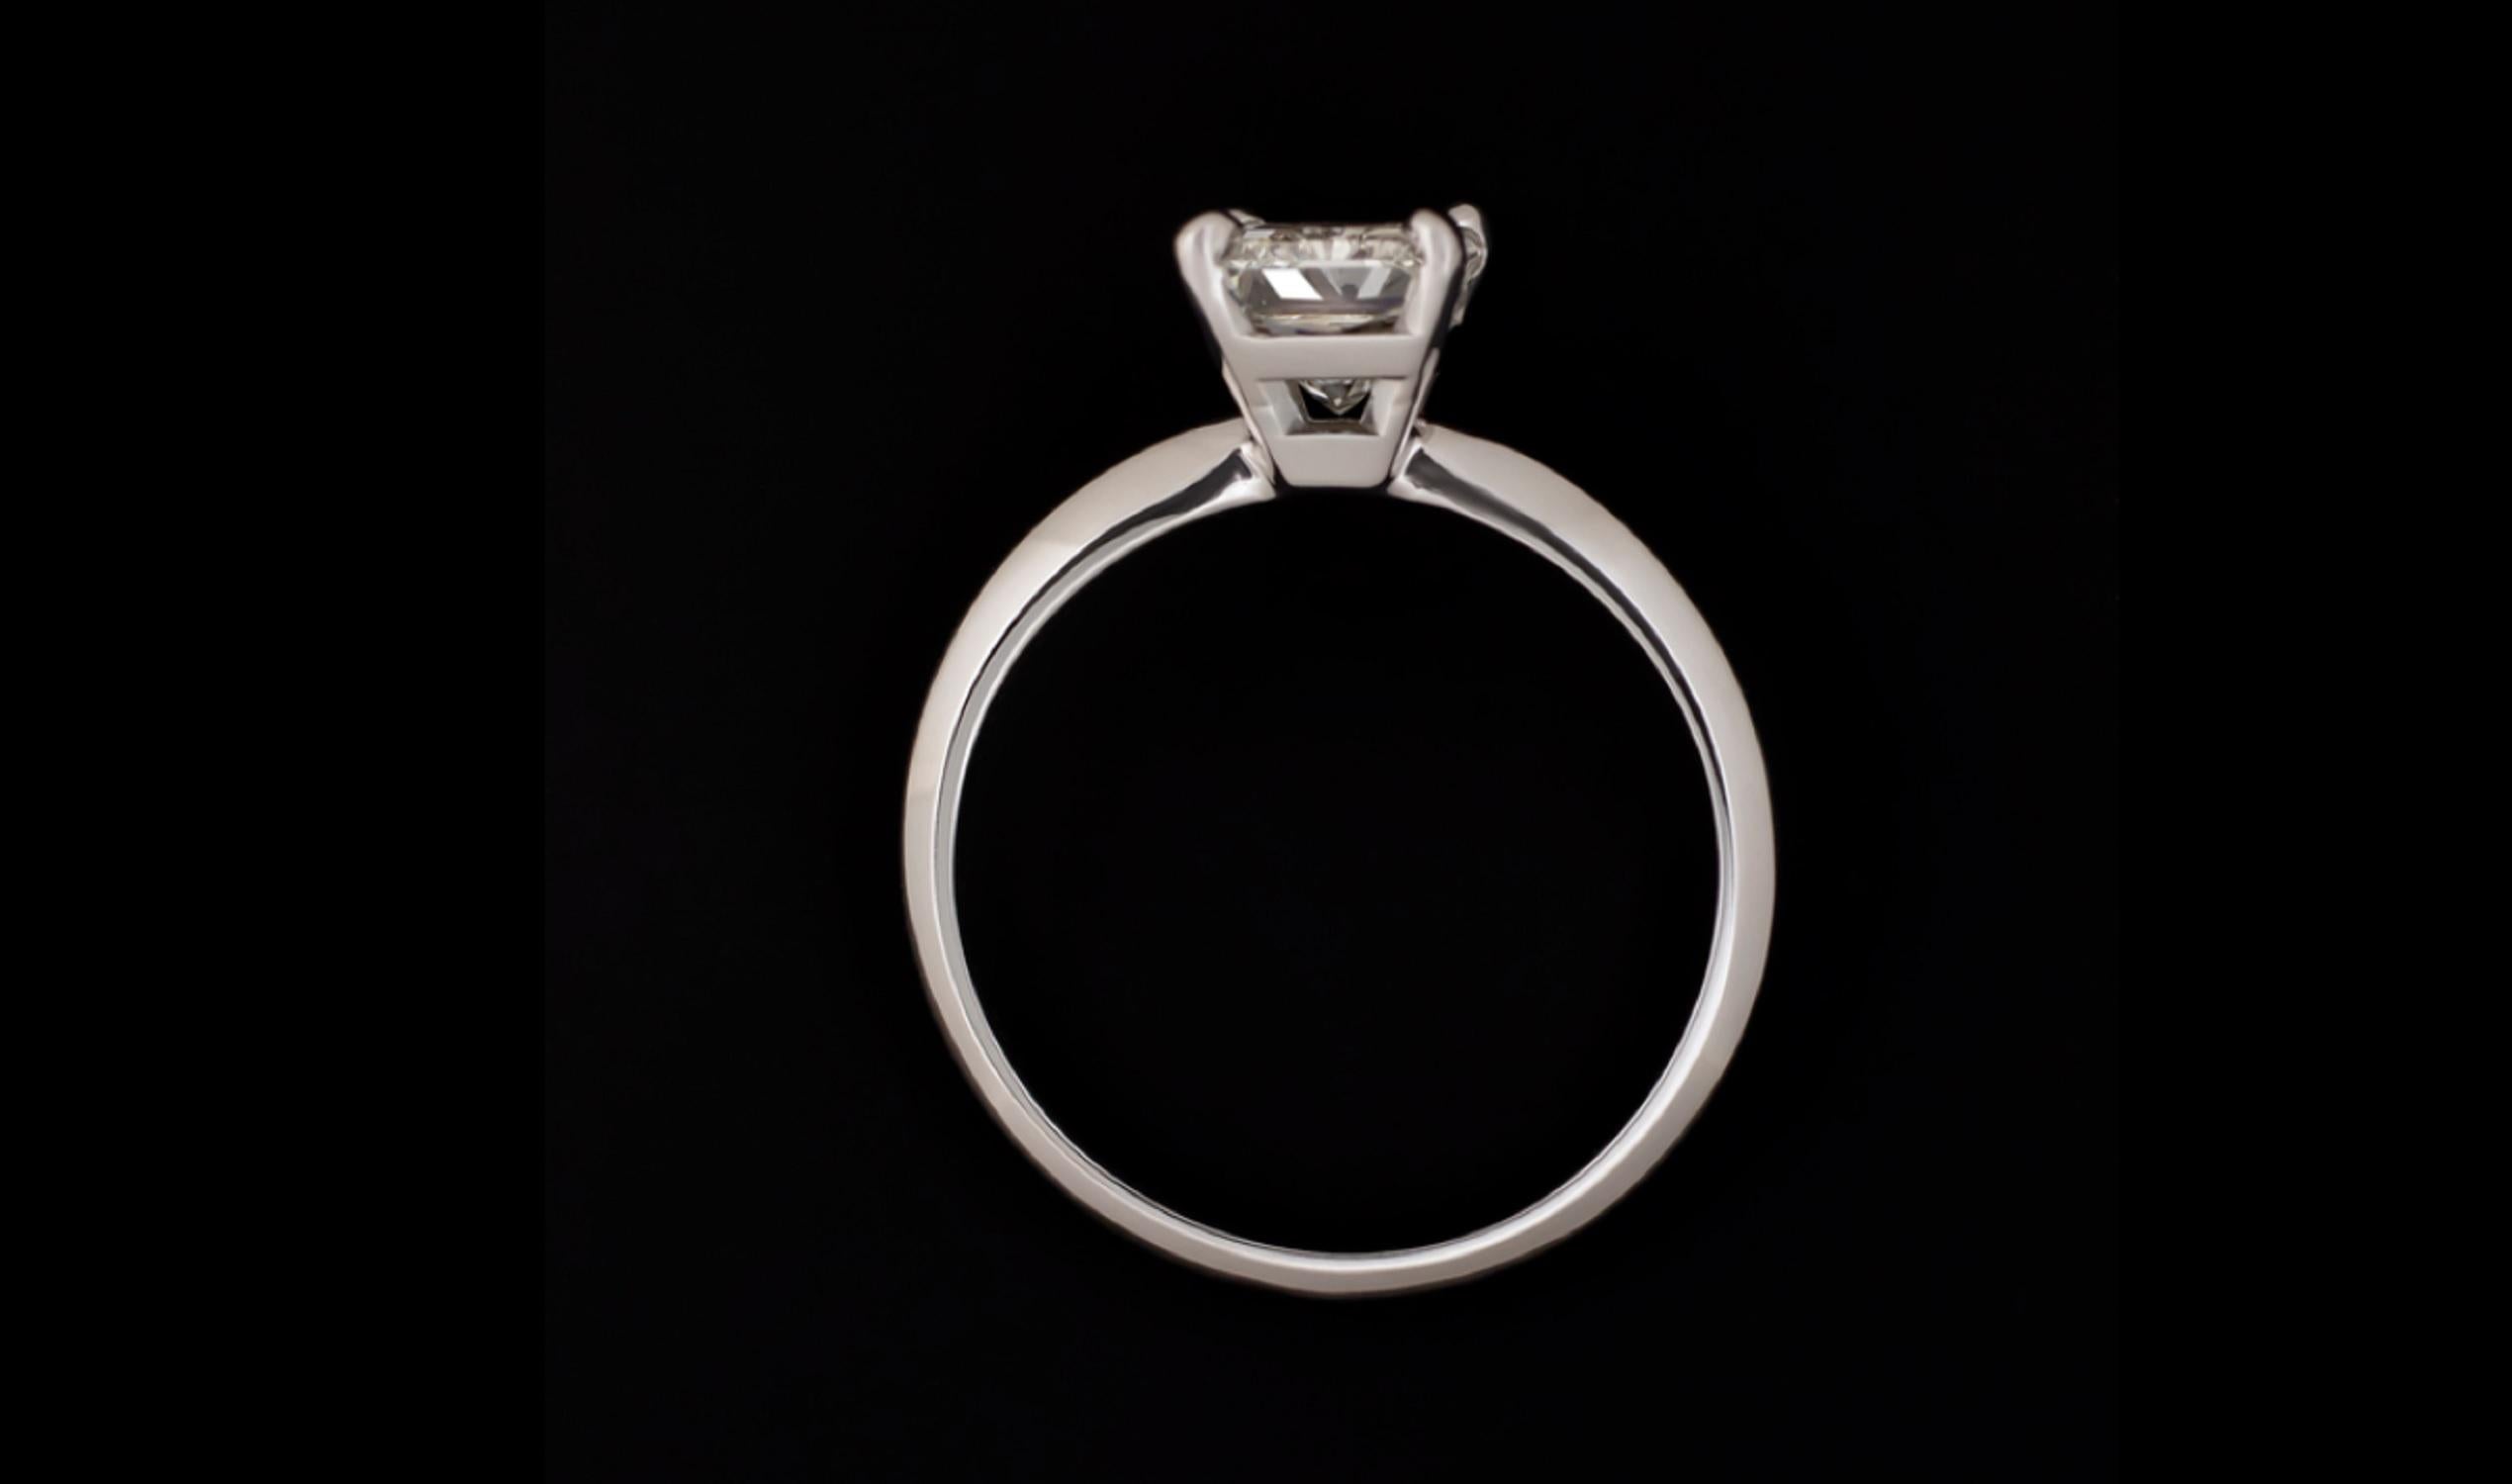  A stunning 1.35 carat GIA certified diamond, this classic solitaire ring boasts glamorous sparkle, impressive size, and a sleek design that will remain forever in style! Mounted in a timeless 14k white gold setting, the impressive I VS2 diamond is